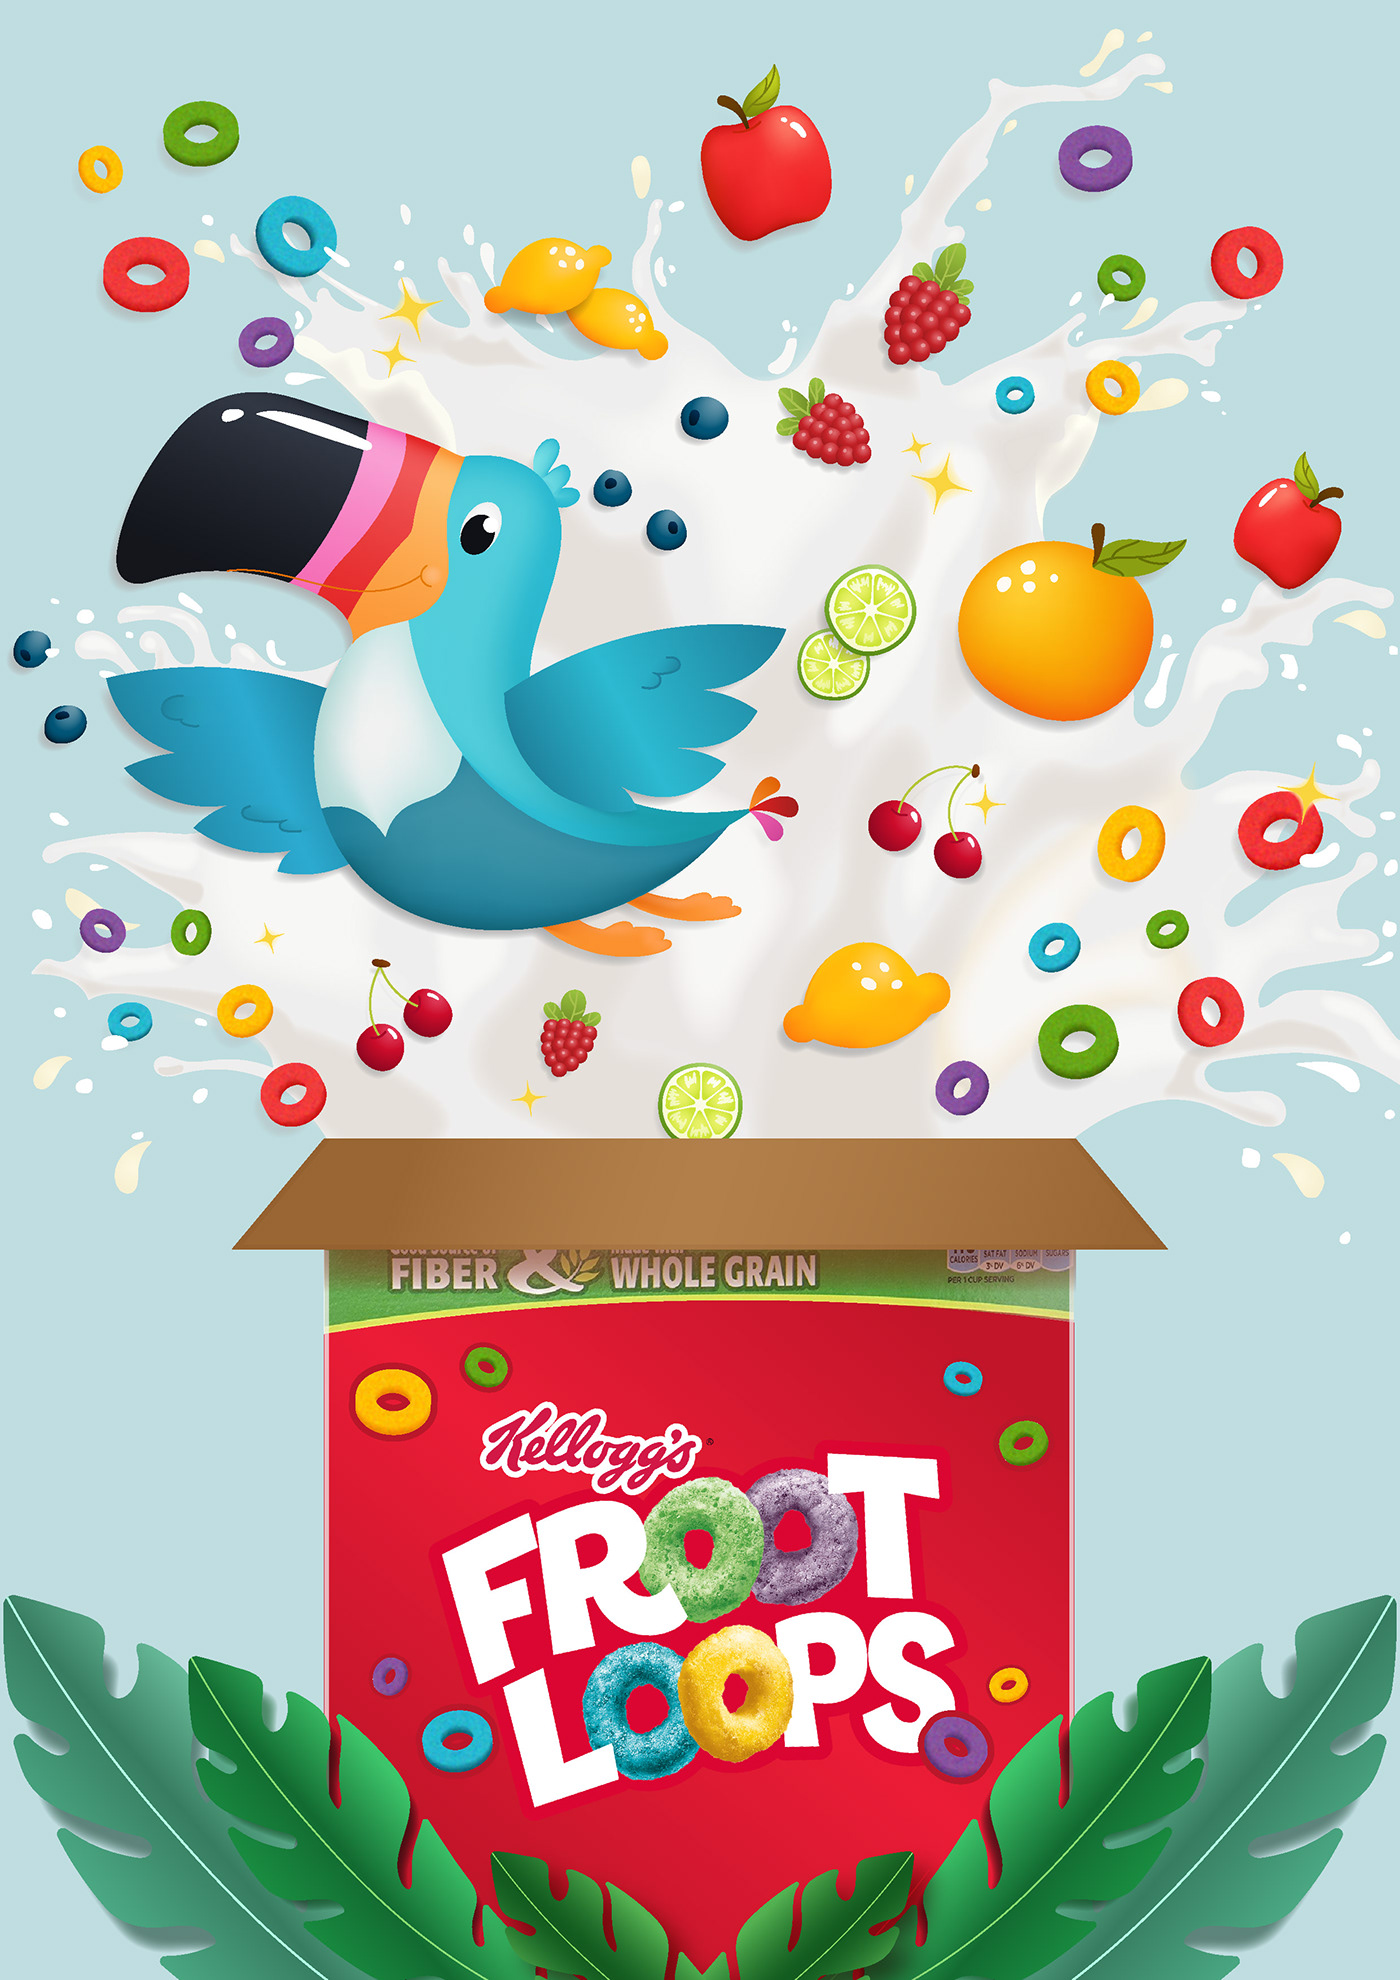 graphic design  Advertising  poster ILLUSTRATION  Froot Loops Cereal Poster Design